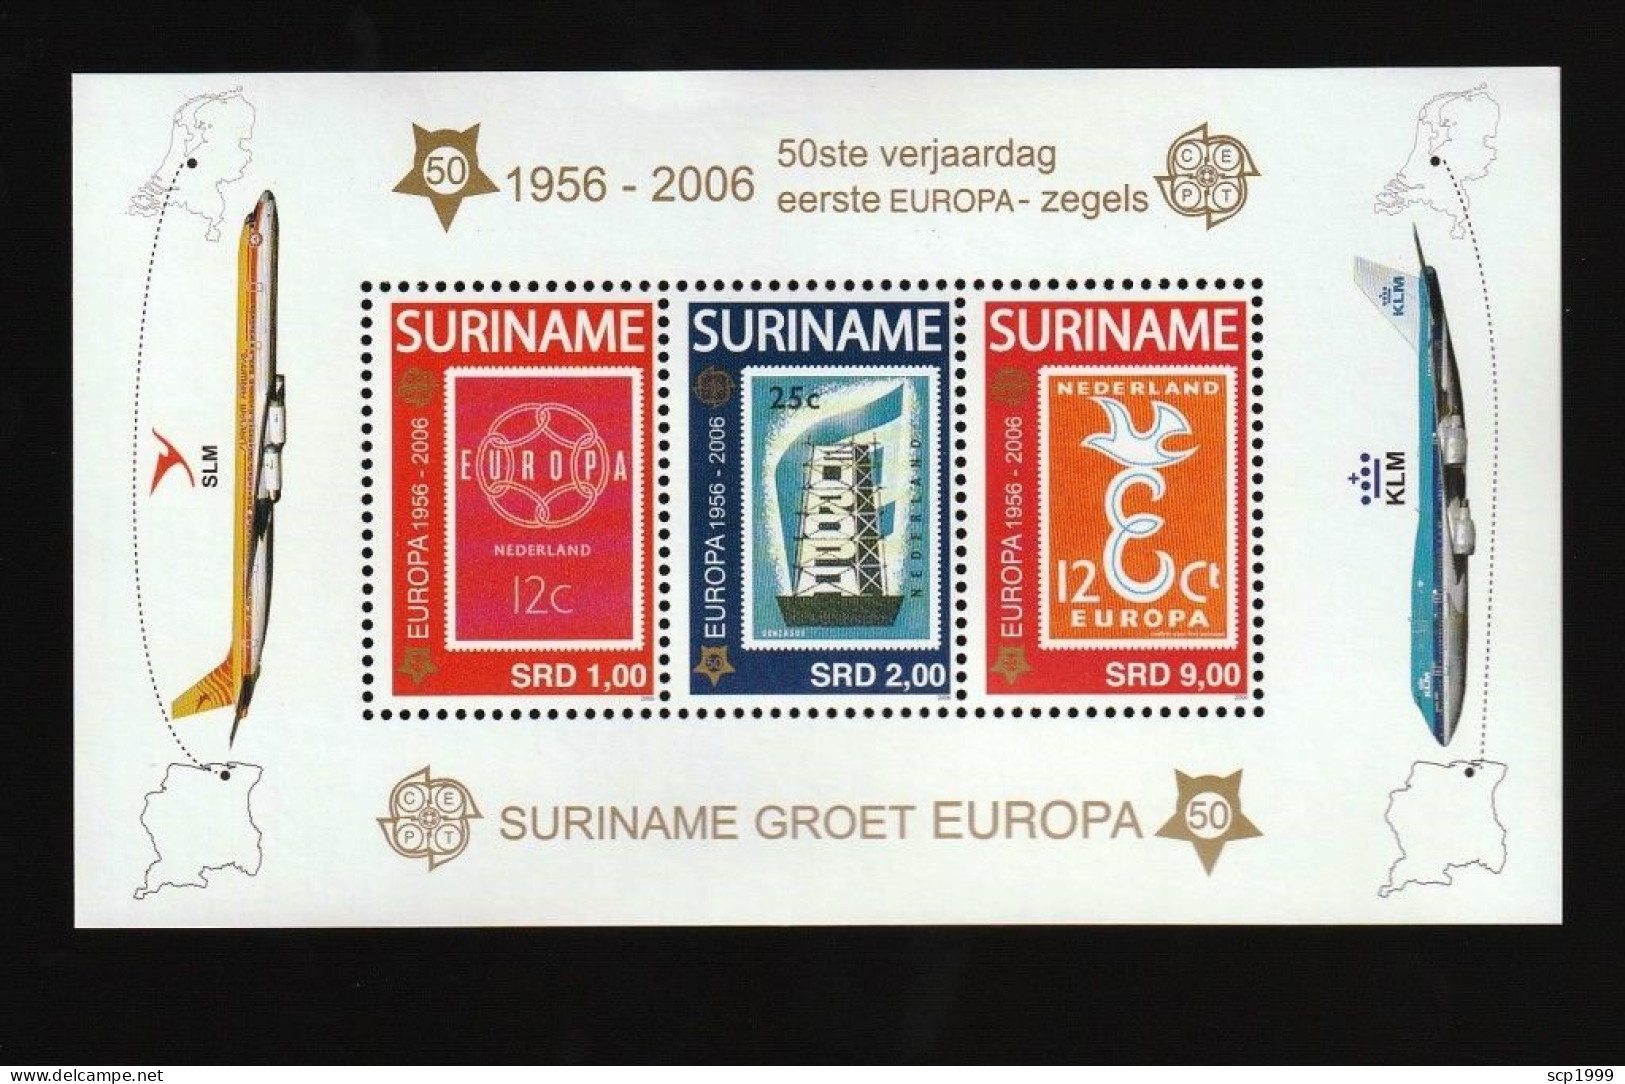 Suriname 2006 - Europa 50 Years Stamps S/S MNH - Surinam